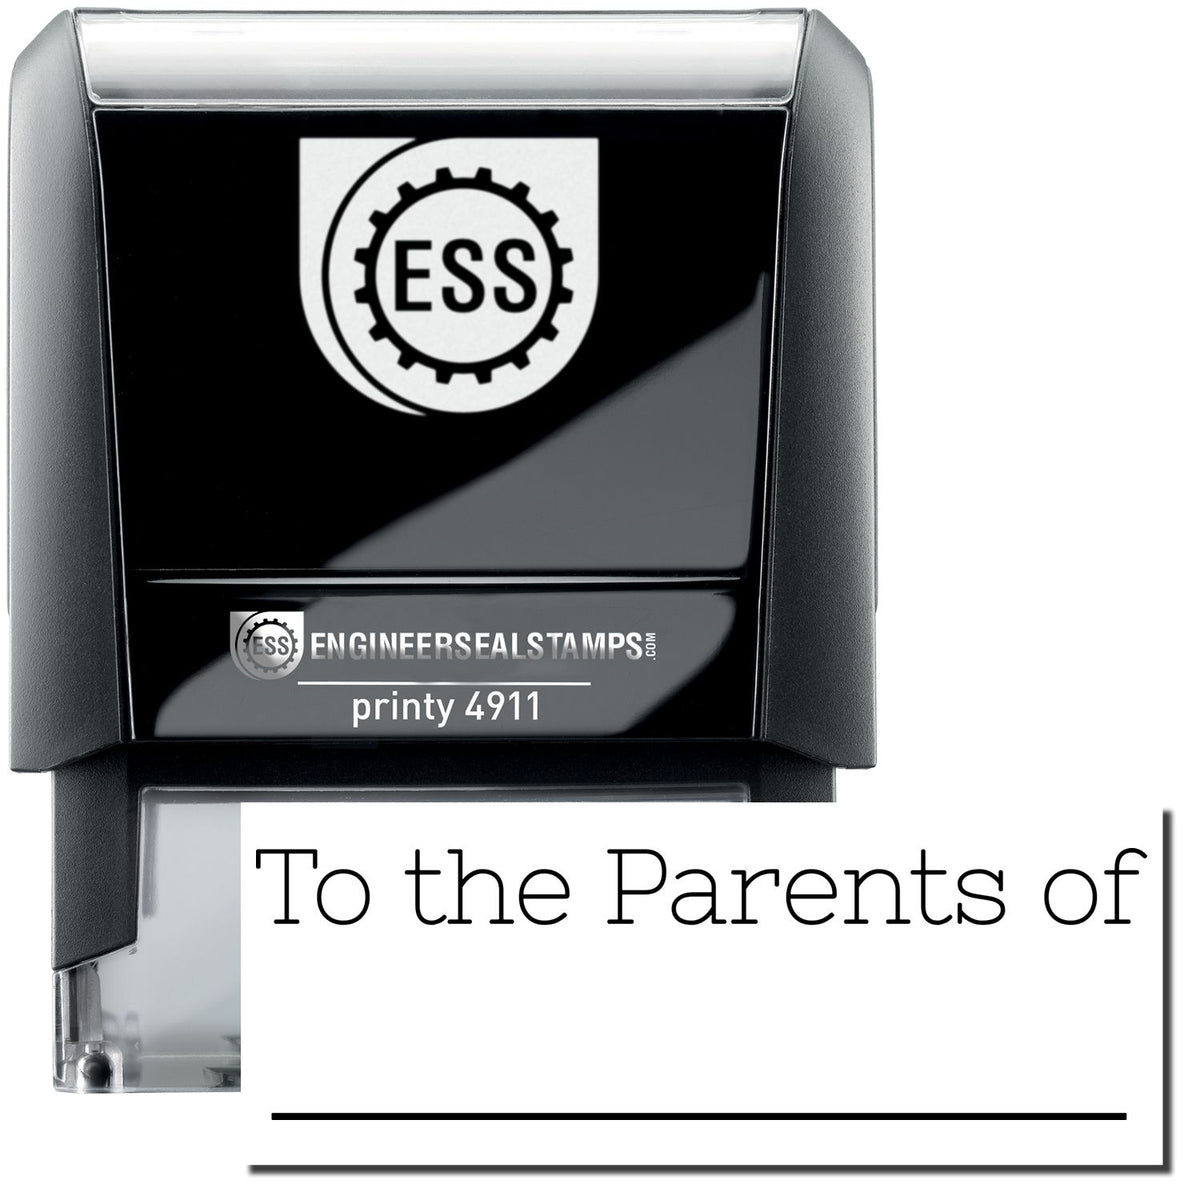 A self-inking stamp with a stamped image showing how the text &quot;To the Parents of&quot; (in a skinny font with a line underneath) is displayed after stamping.